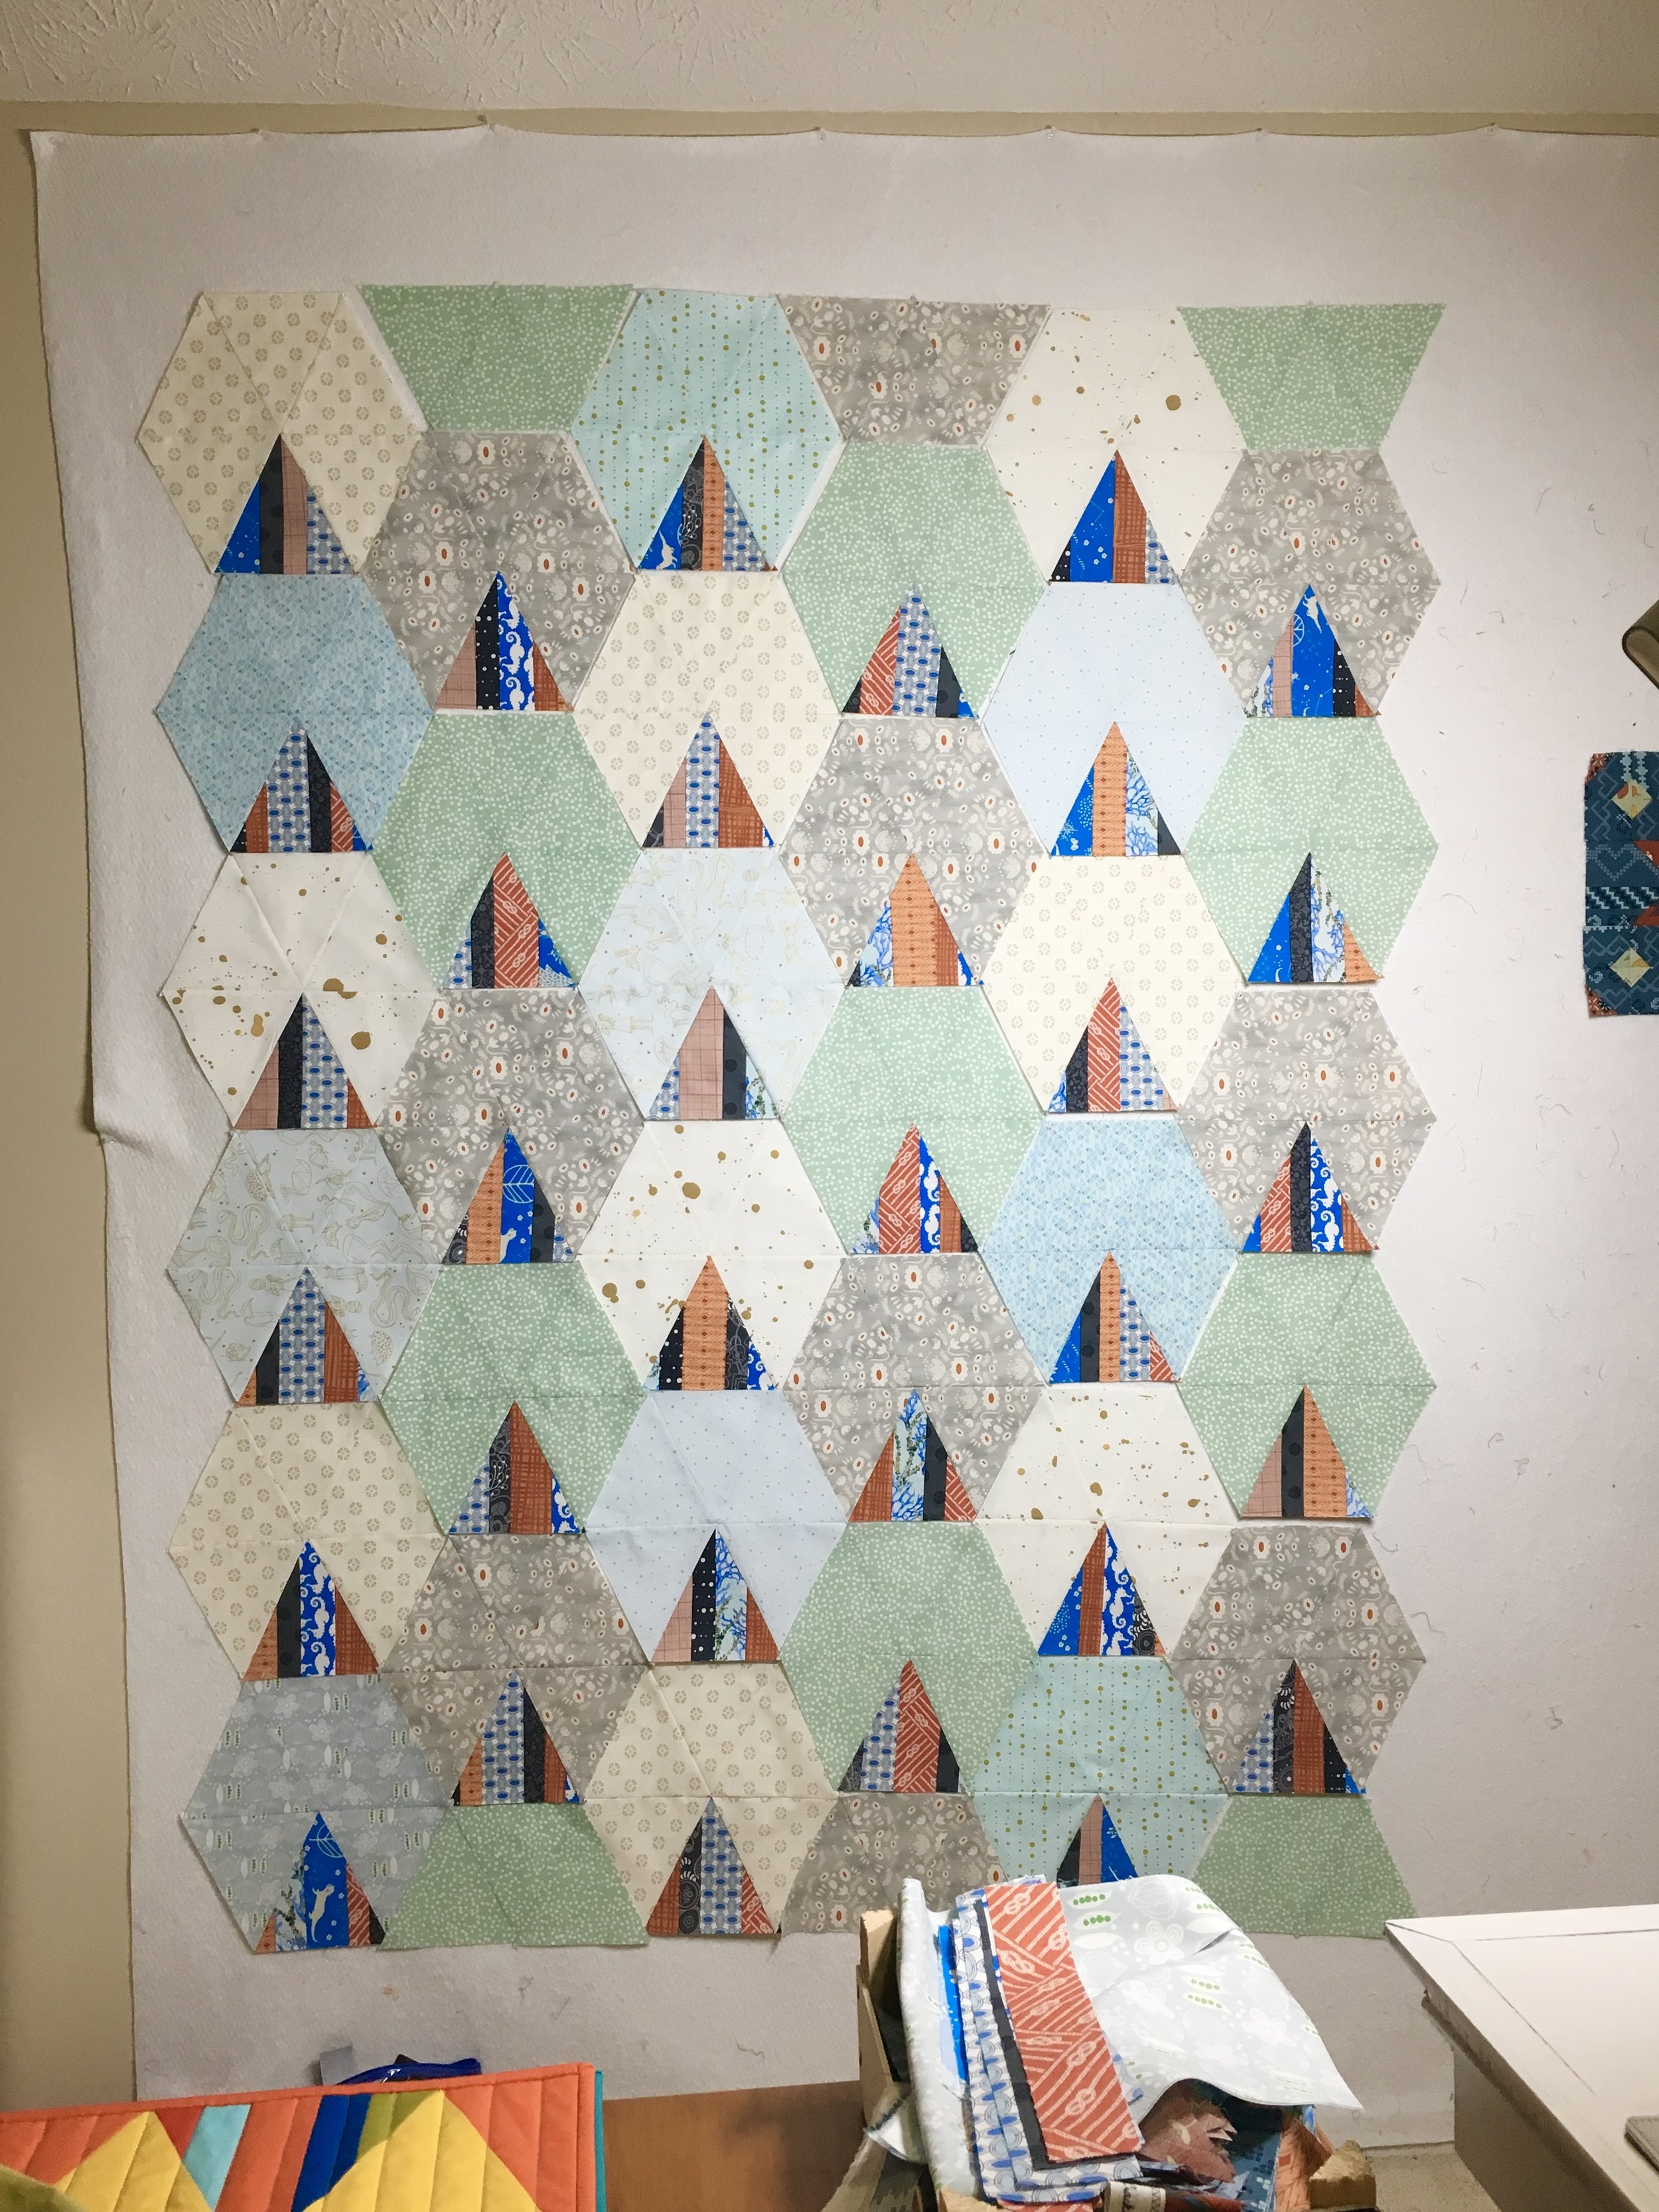 How to Choose the Right Quilt Batting For Your Quilting Project